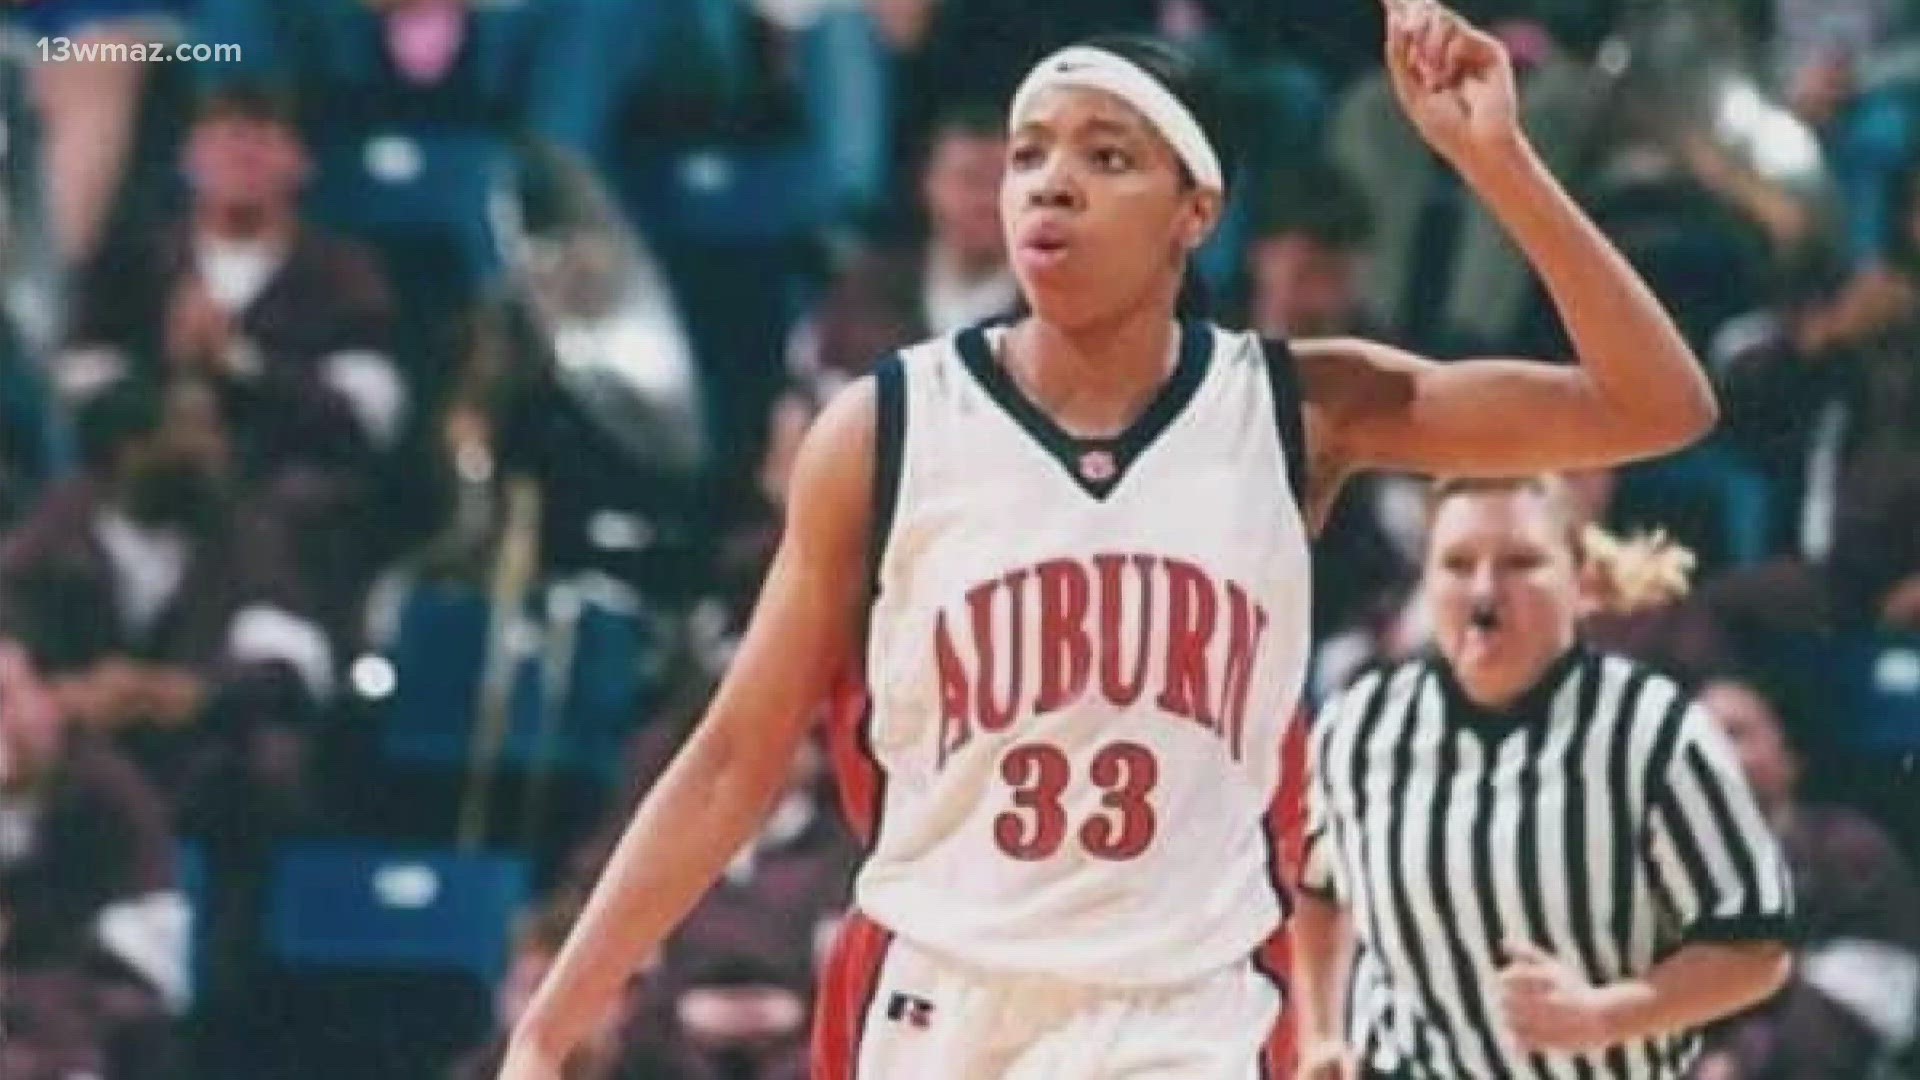 Shana Askew Daniels was a standout basketball player at Southwest High School in the mid-1990s